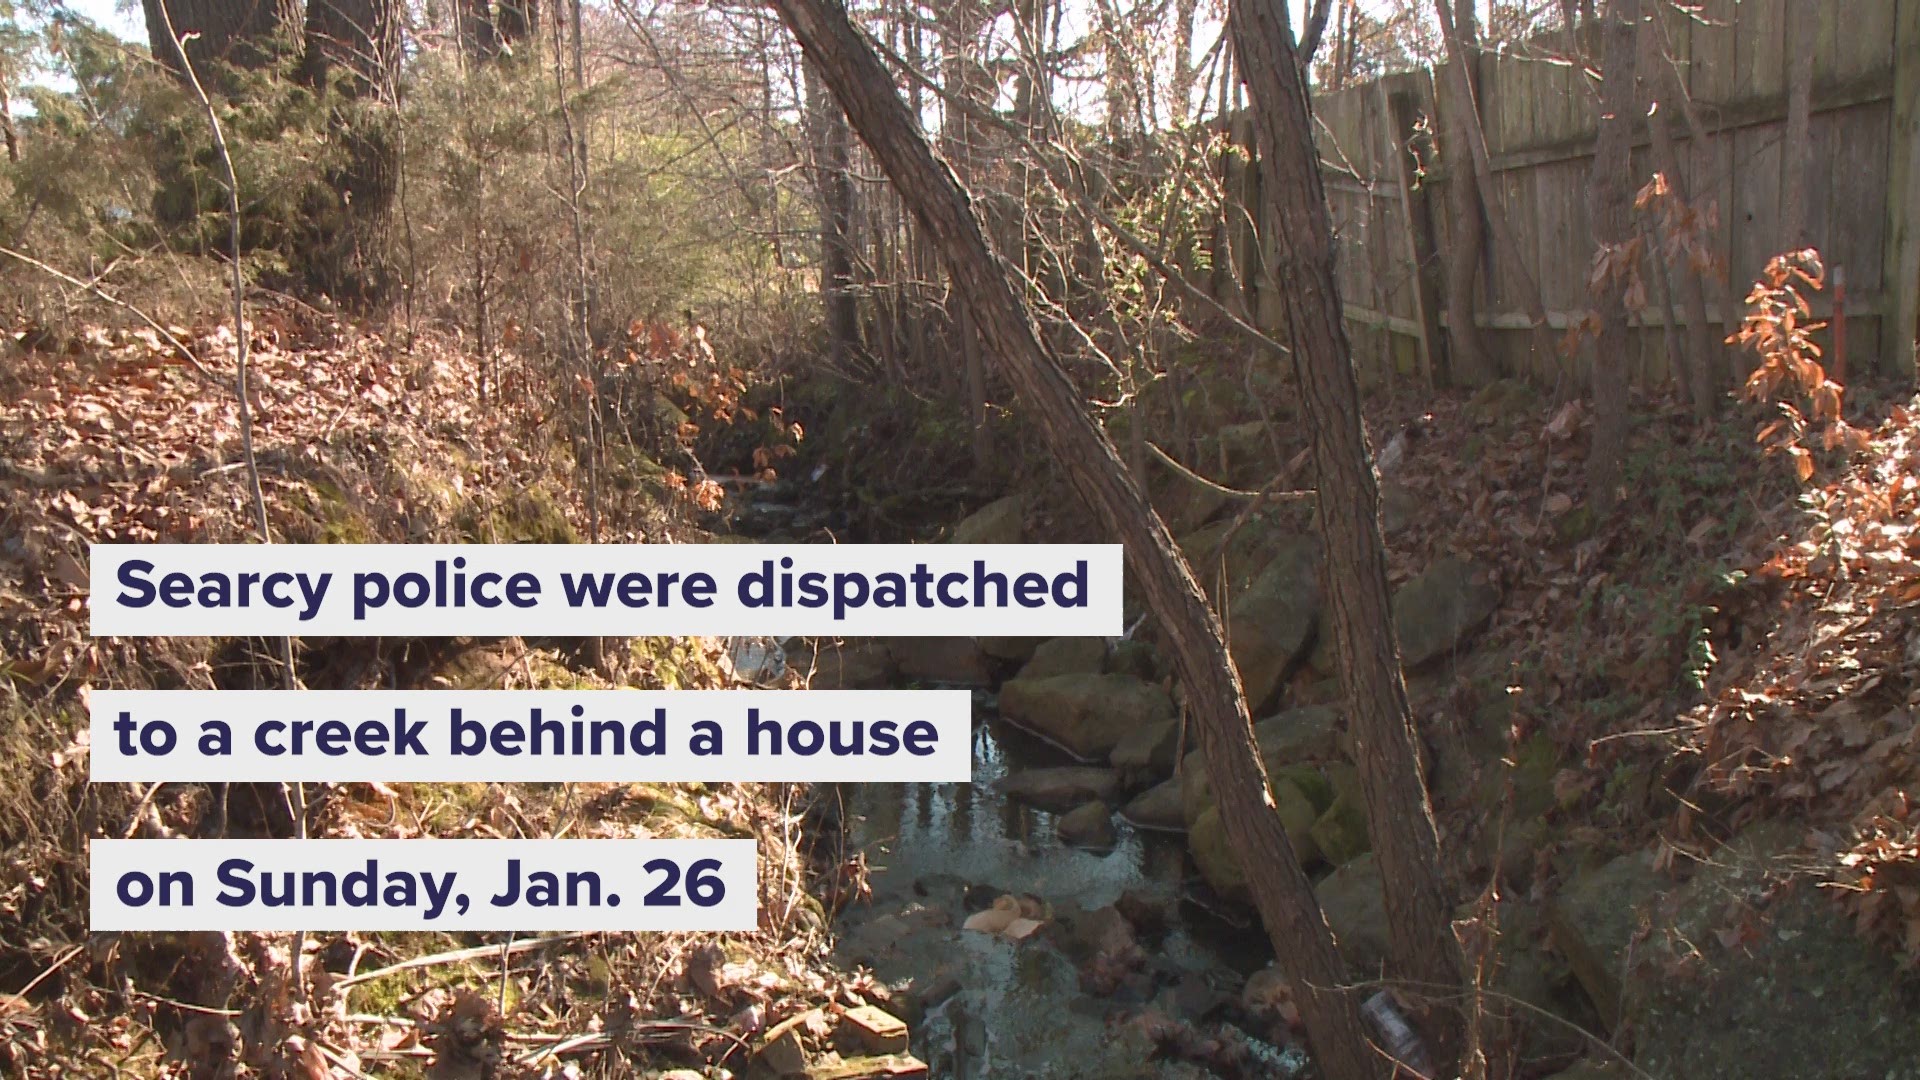 According to Searcy police, a deceased body was found on Sunday in a creek behind a home,